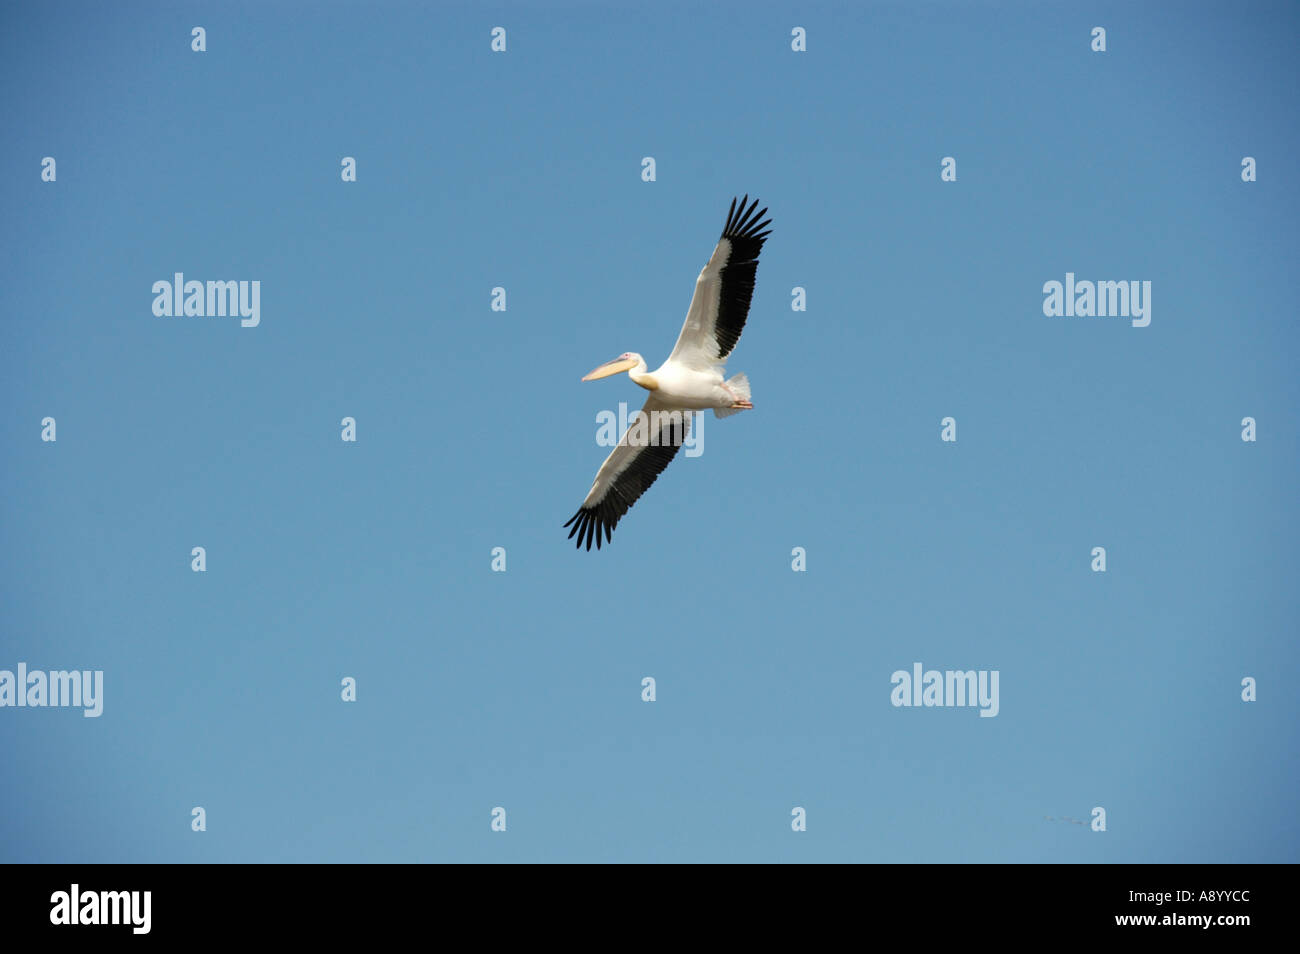 Flying pelican with widespread wings in the blue sky near Arba Minch Ethiopia Stock Photo